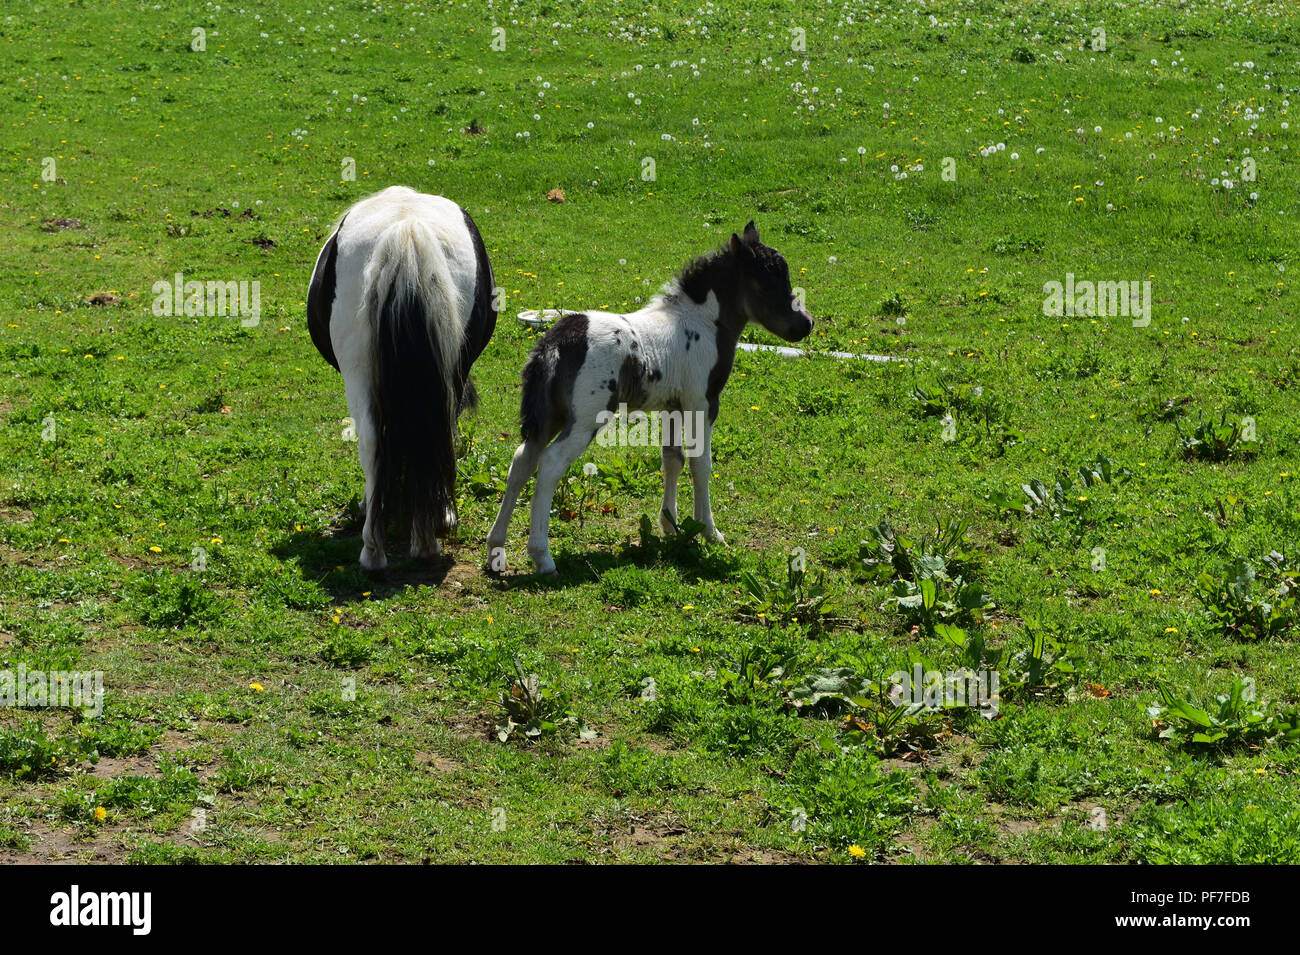 Beautiful white and black miniature horse family in a grass field. Stock Photo